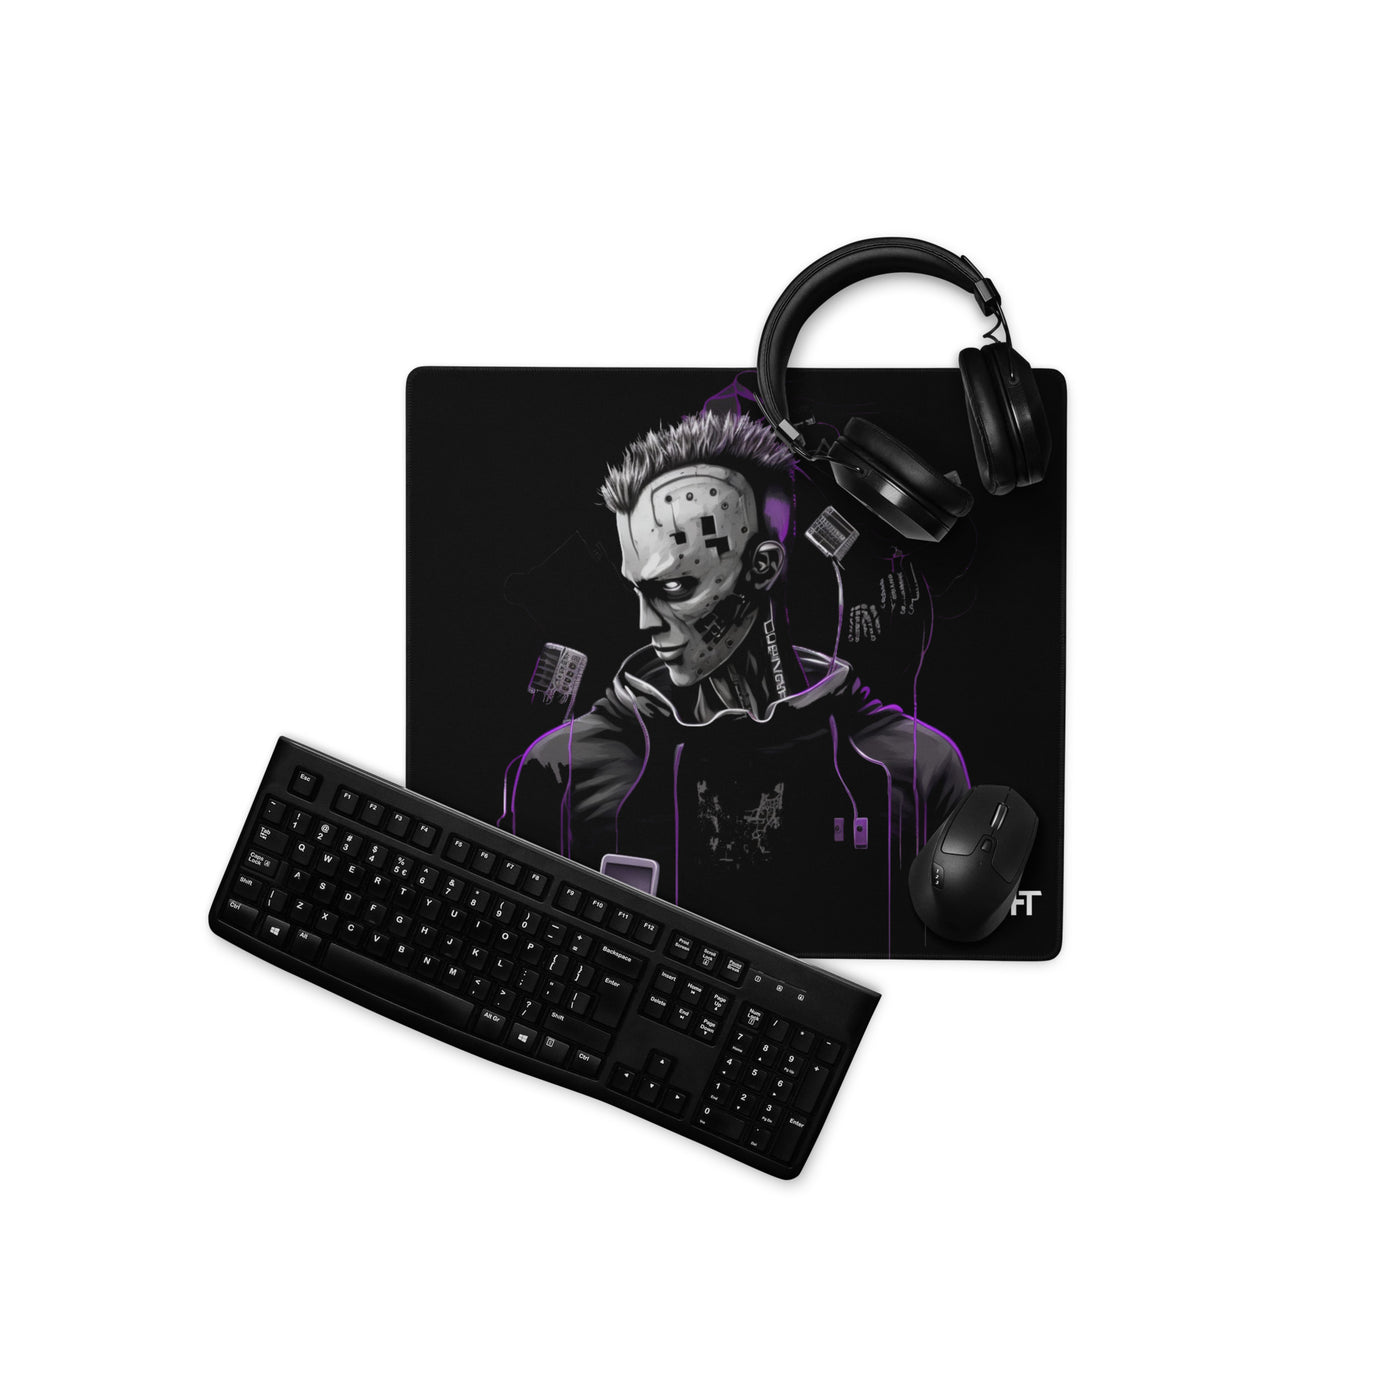 Cyberware assassin v46 - Gaming mouse pad